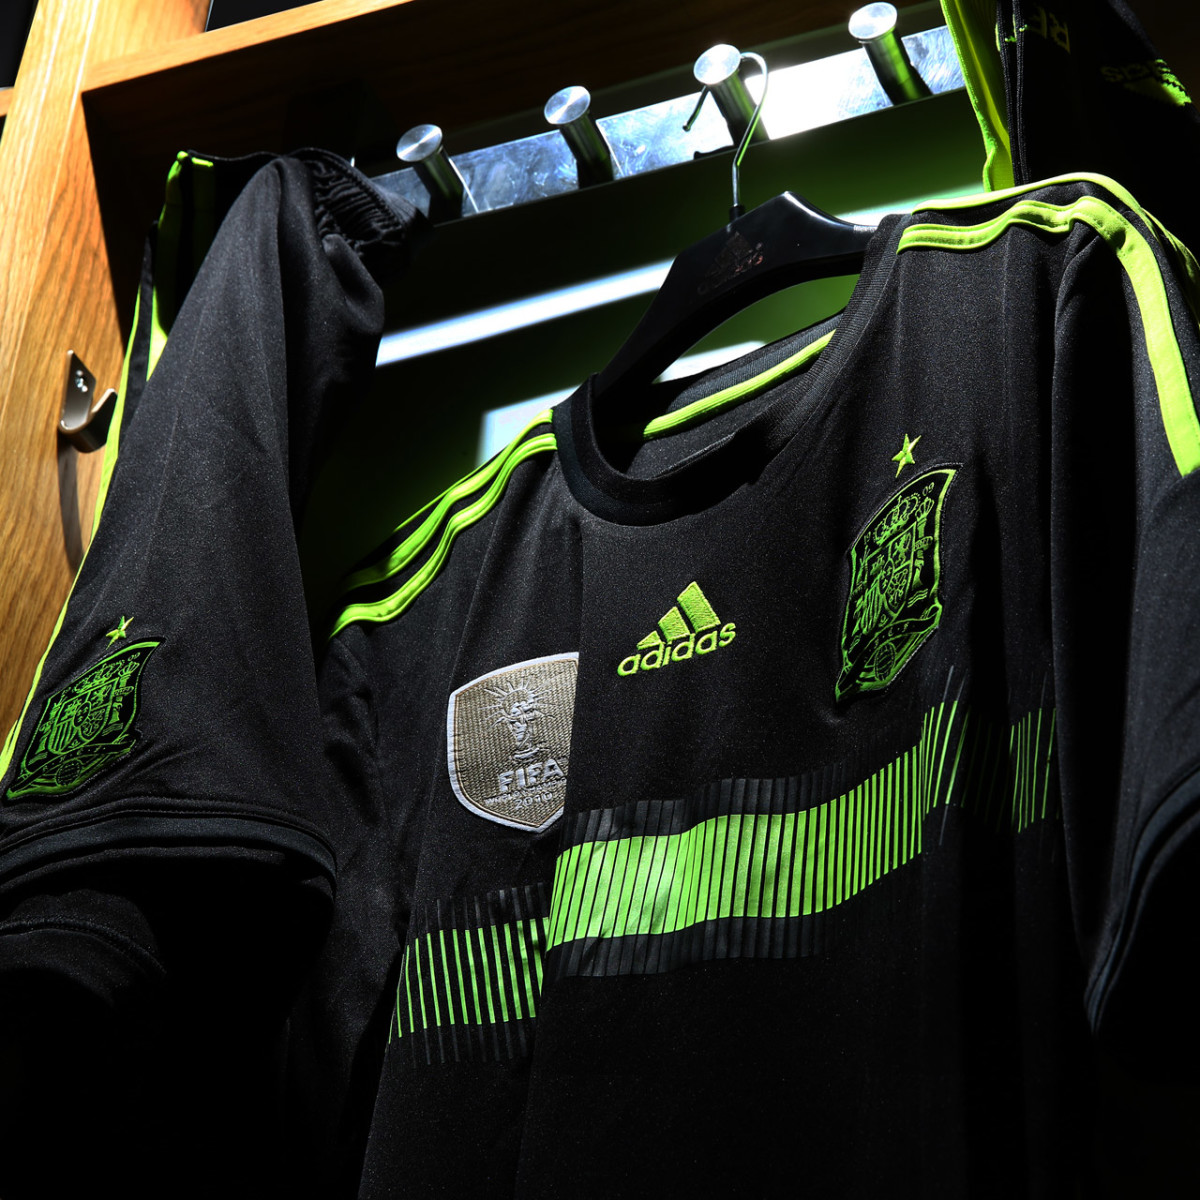 Photos: Adidas reveals 'away' World Cup kits for Germany, Spain ...